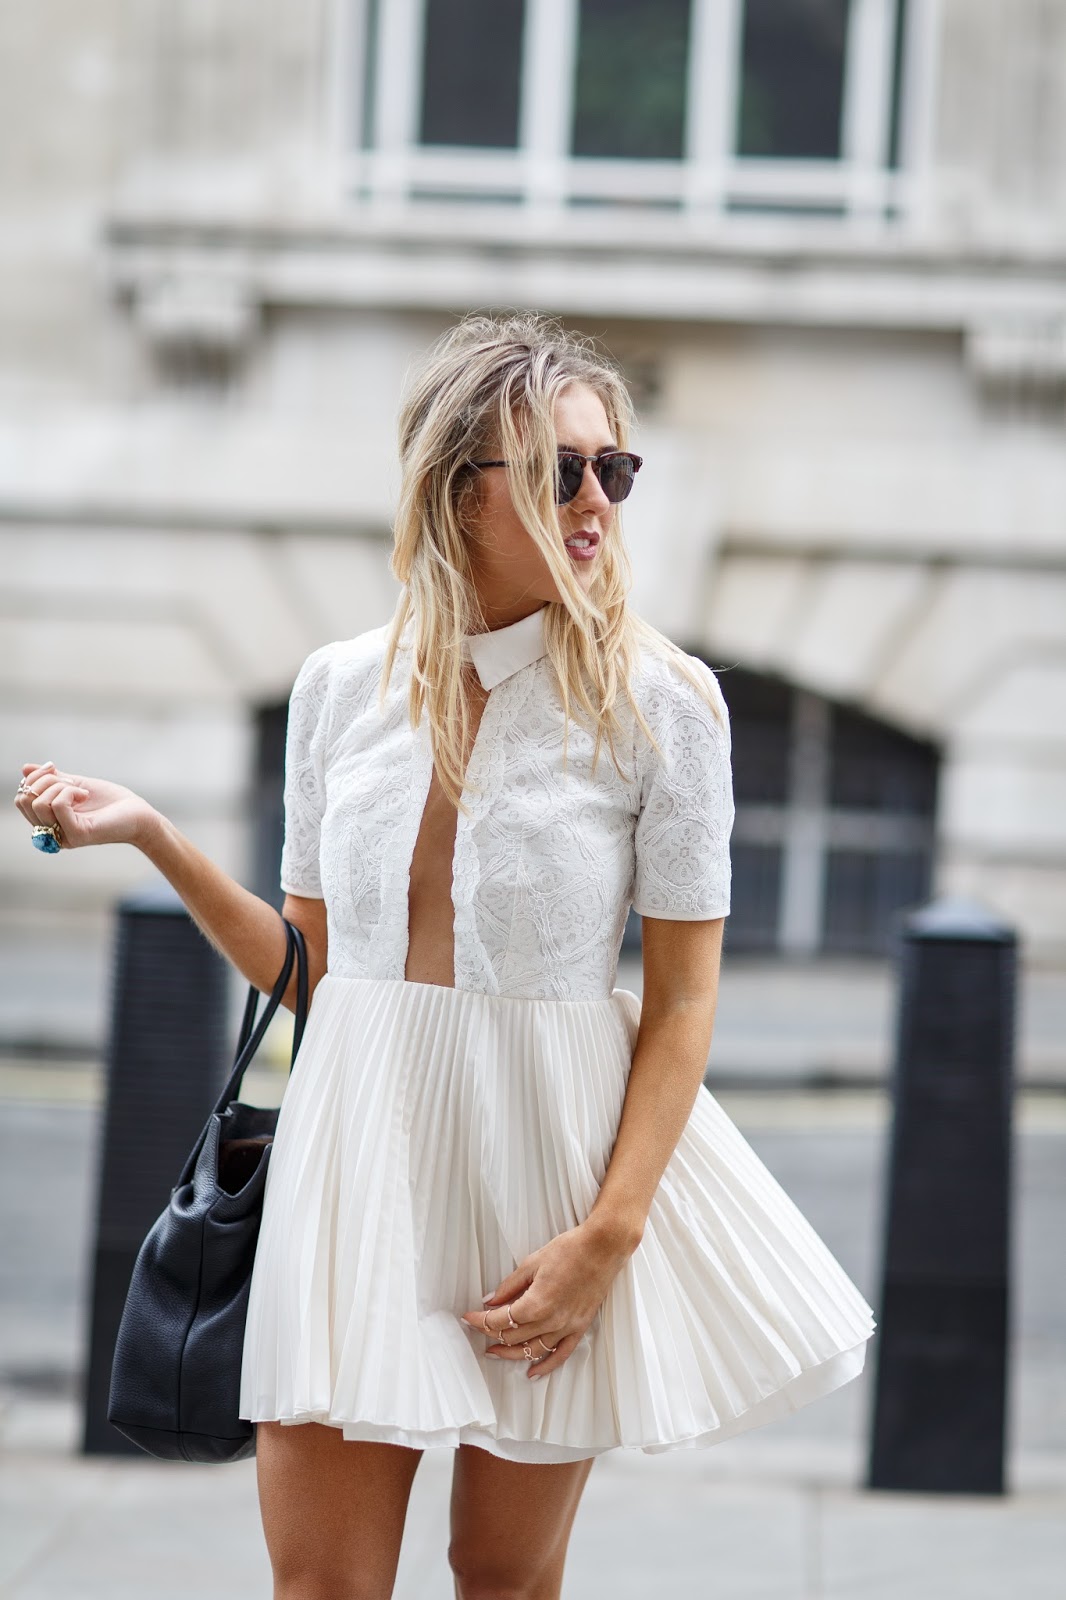 Emtalks: White Lace Pretty Dress With The All Saints Papin Leather